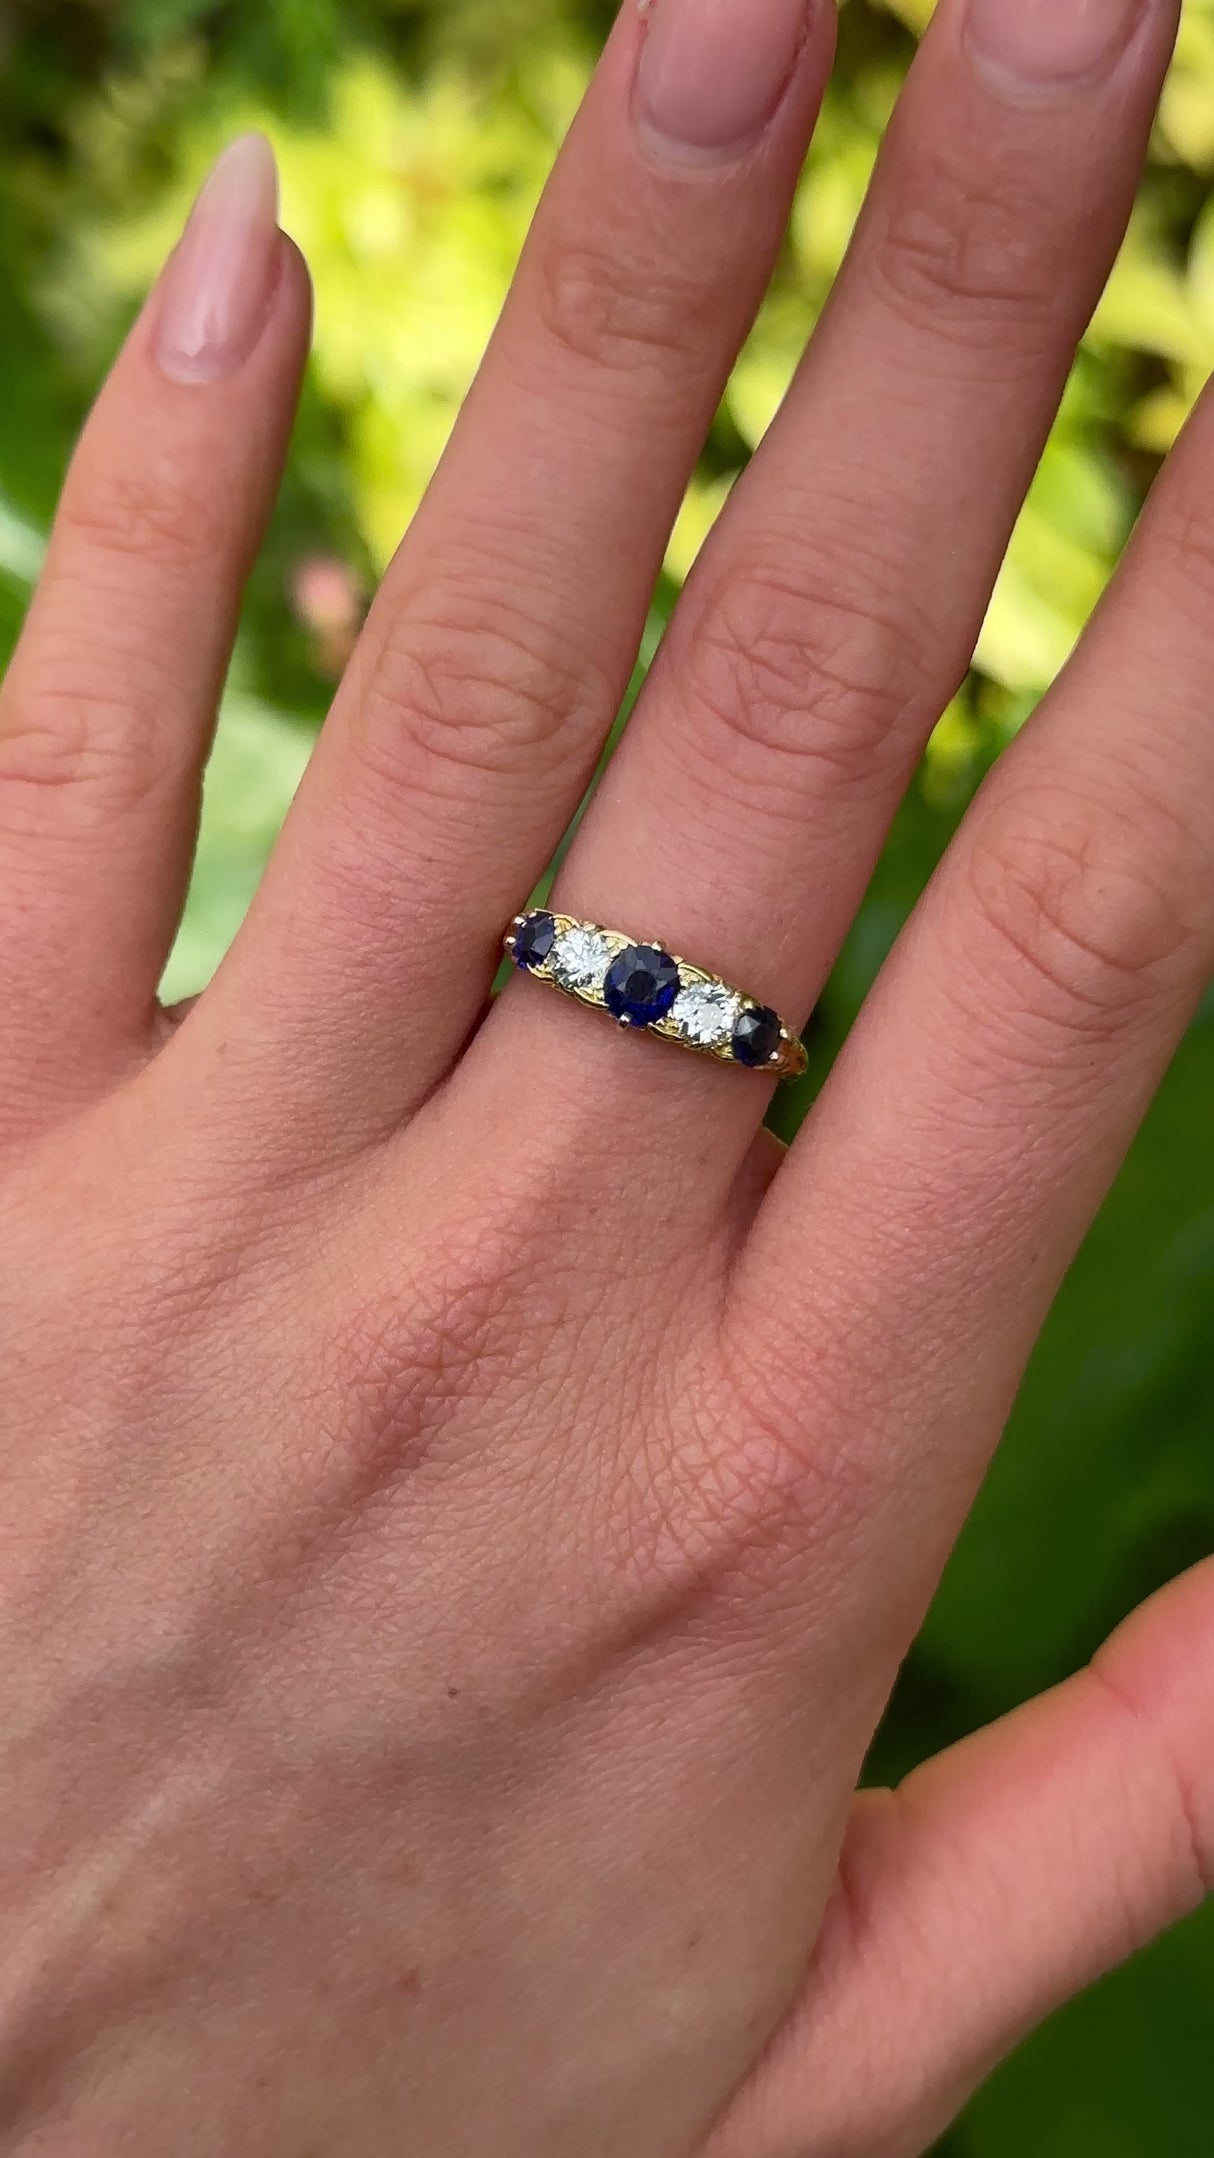 Antique, Edwardian Sapphire and Diamond Five-Stone Ring, 18ct Yellow Gold worn on hand. 